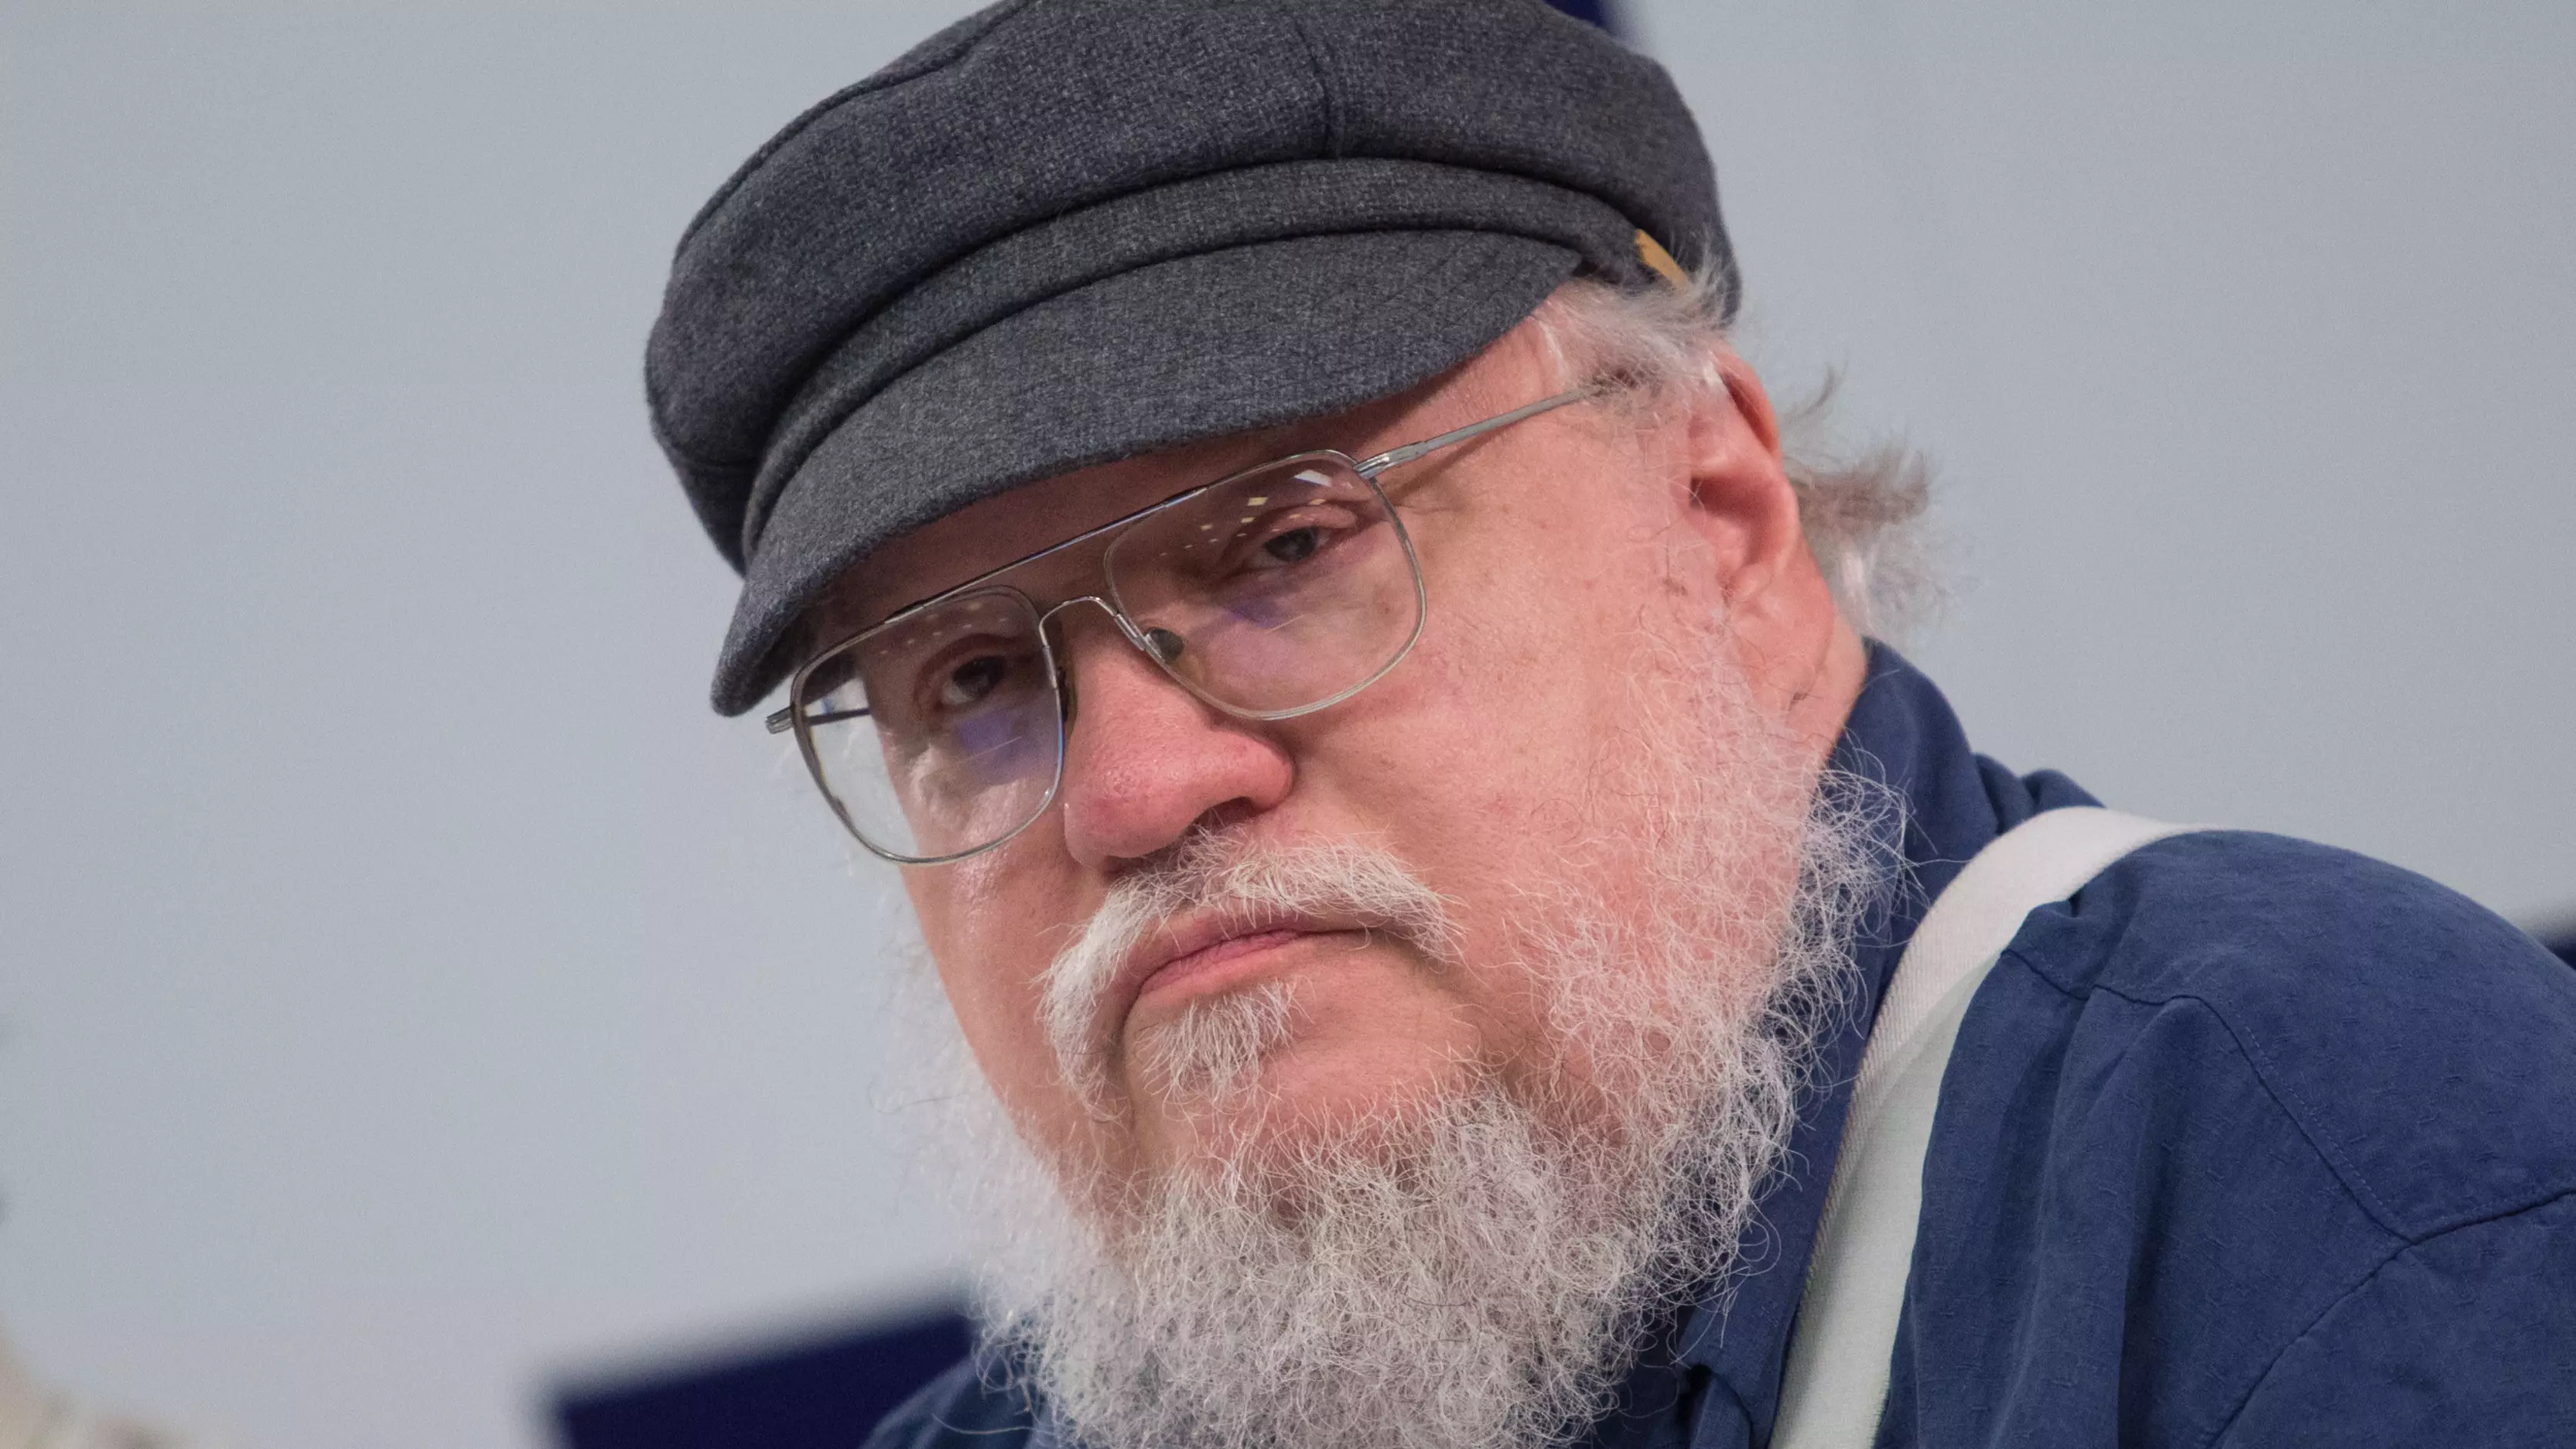 A New Show From 'Game Of Thrones' Writer George R. R. Martin Is Coming To Netflix Next Year